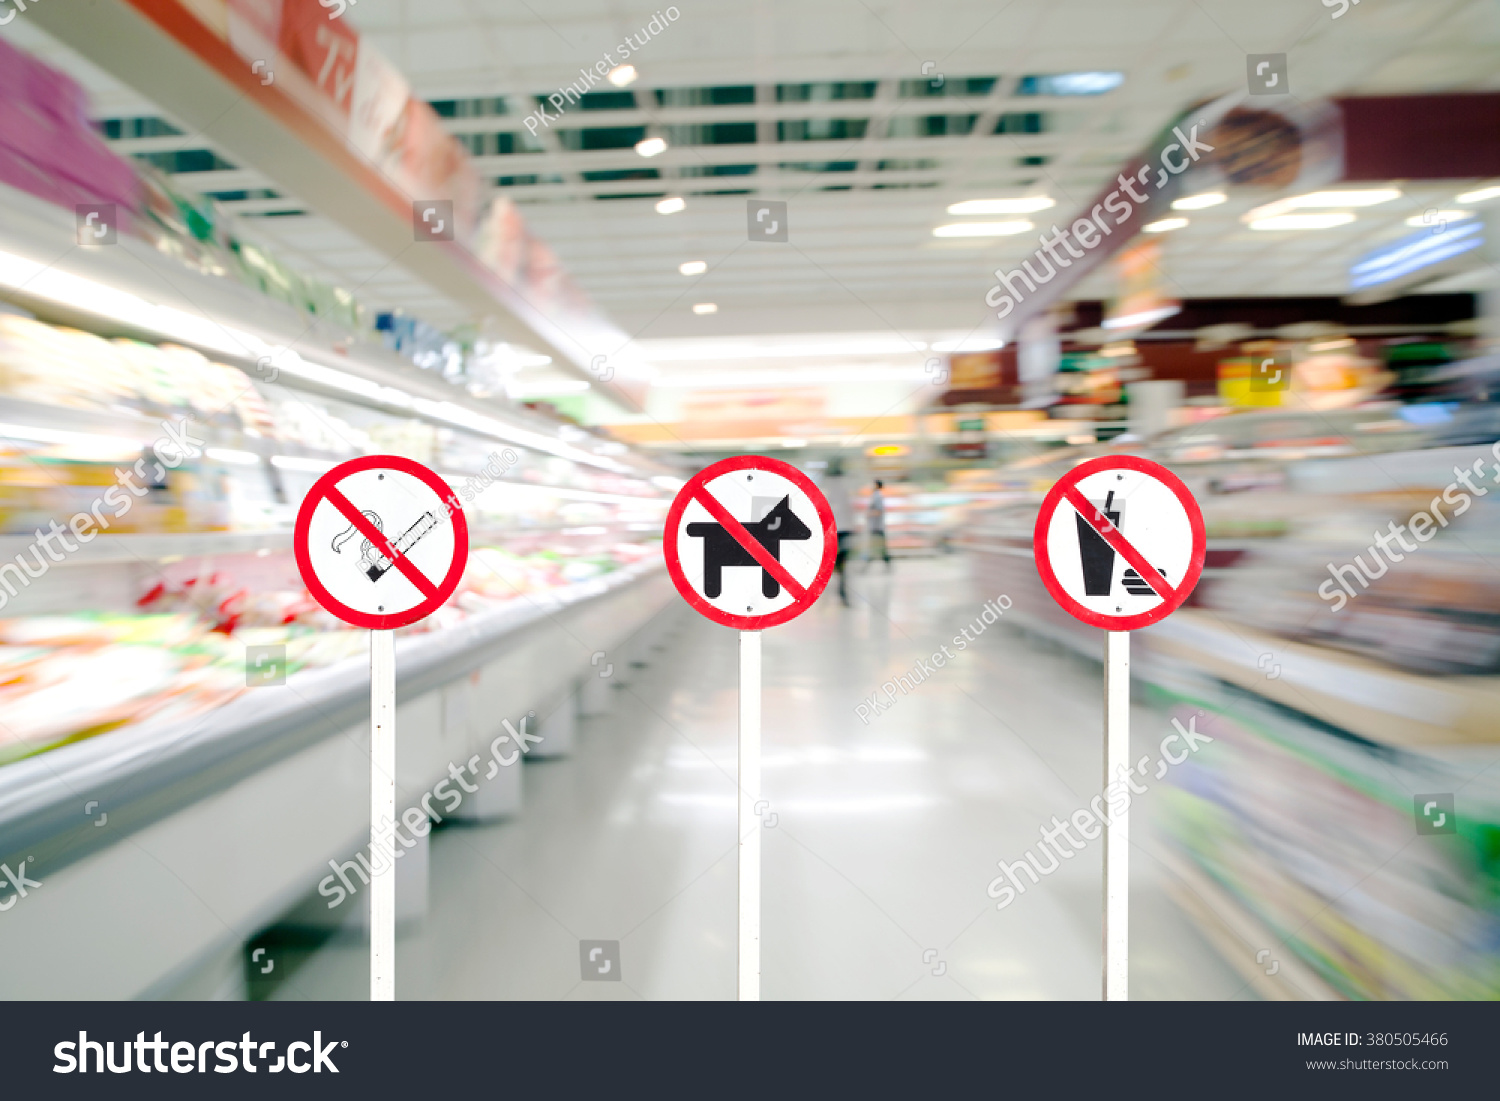 are dogs allowed in food stores